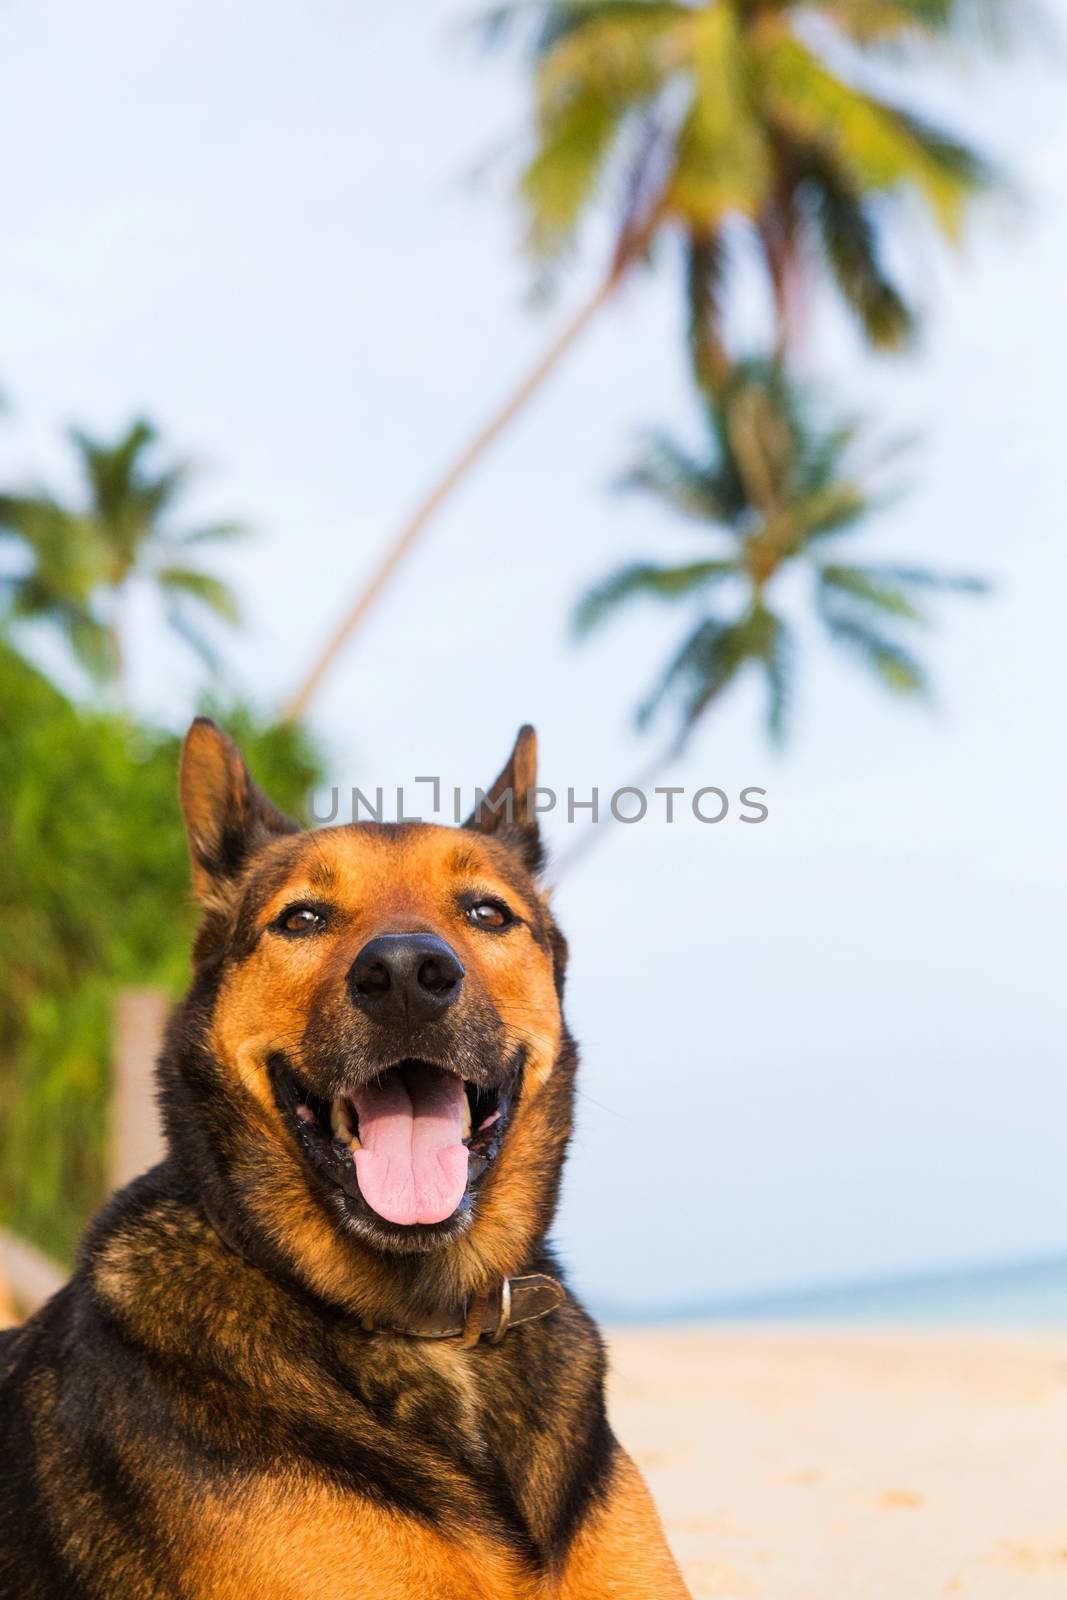 A happy dog  playing at the beach.  by Bowonpat